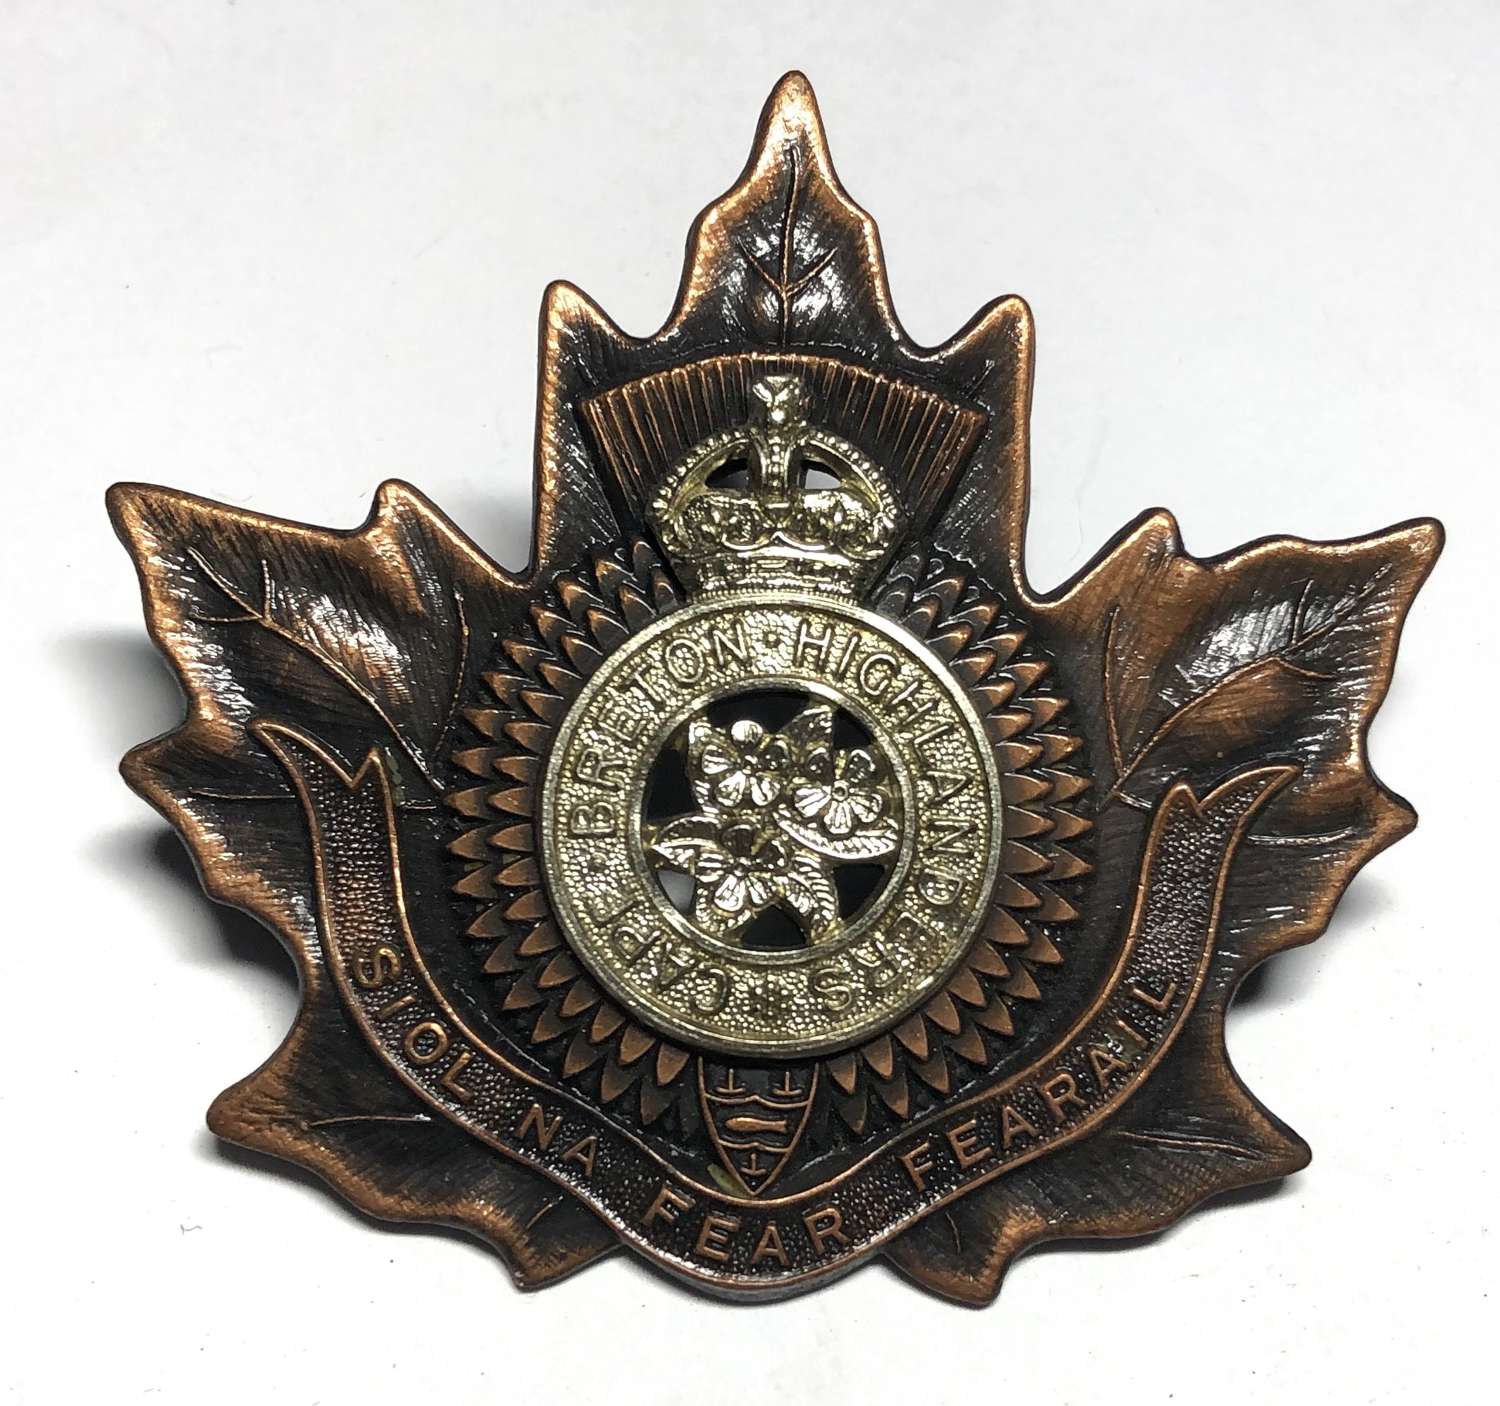 Canadian Cape Breton Highlanders head-dress badge by Scully